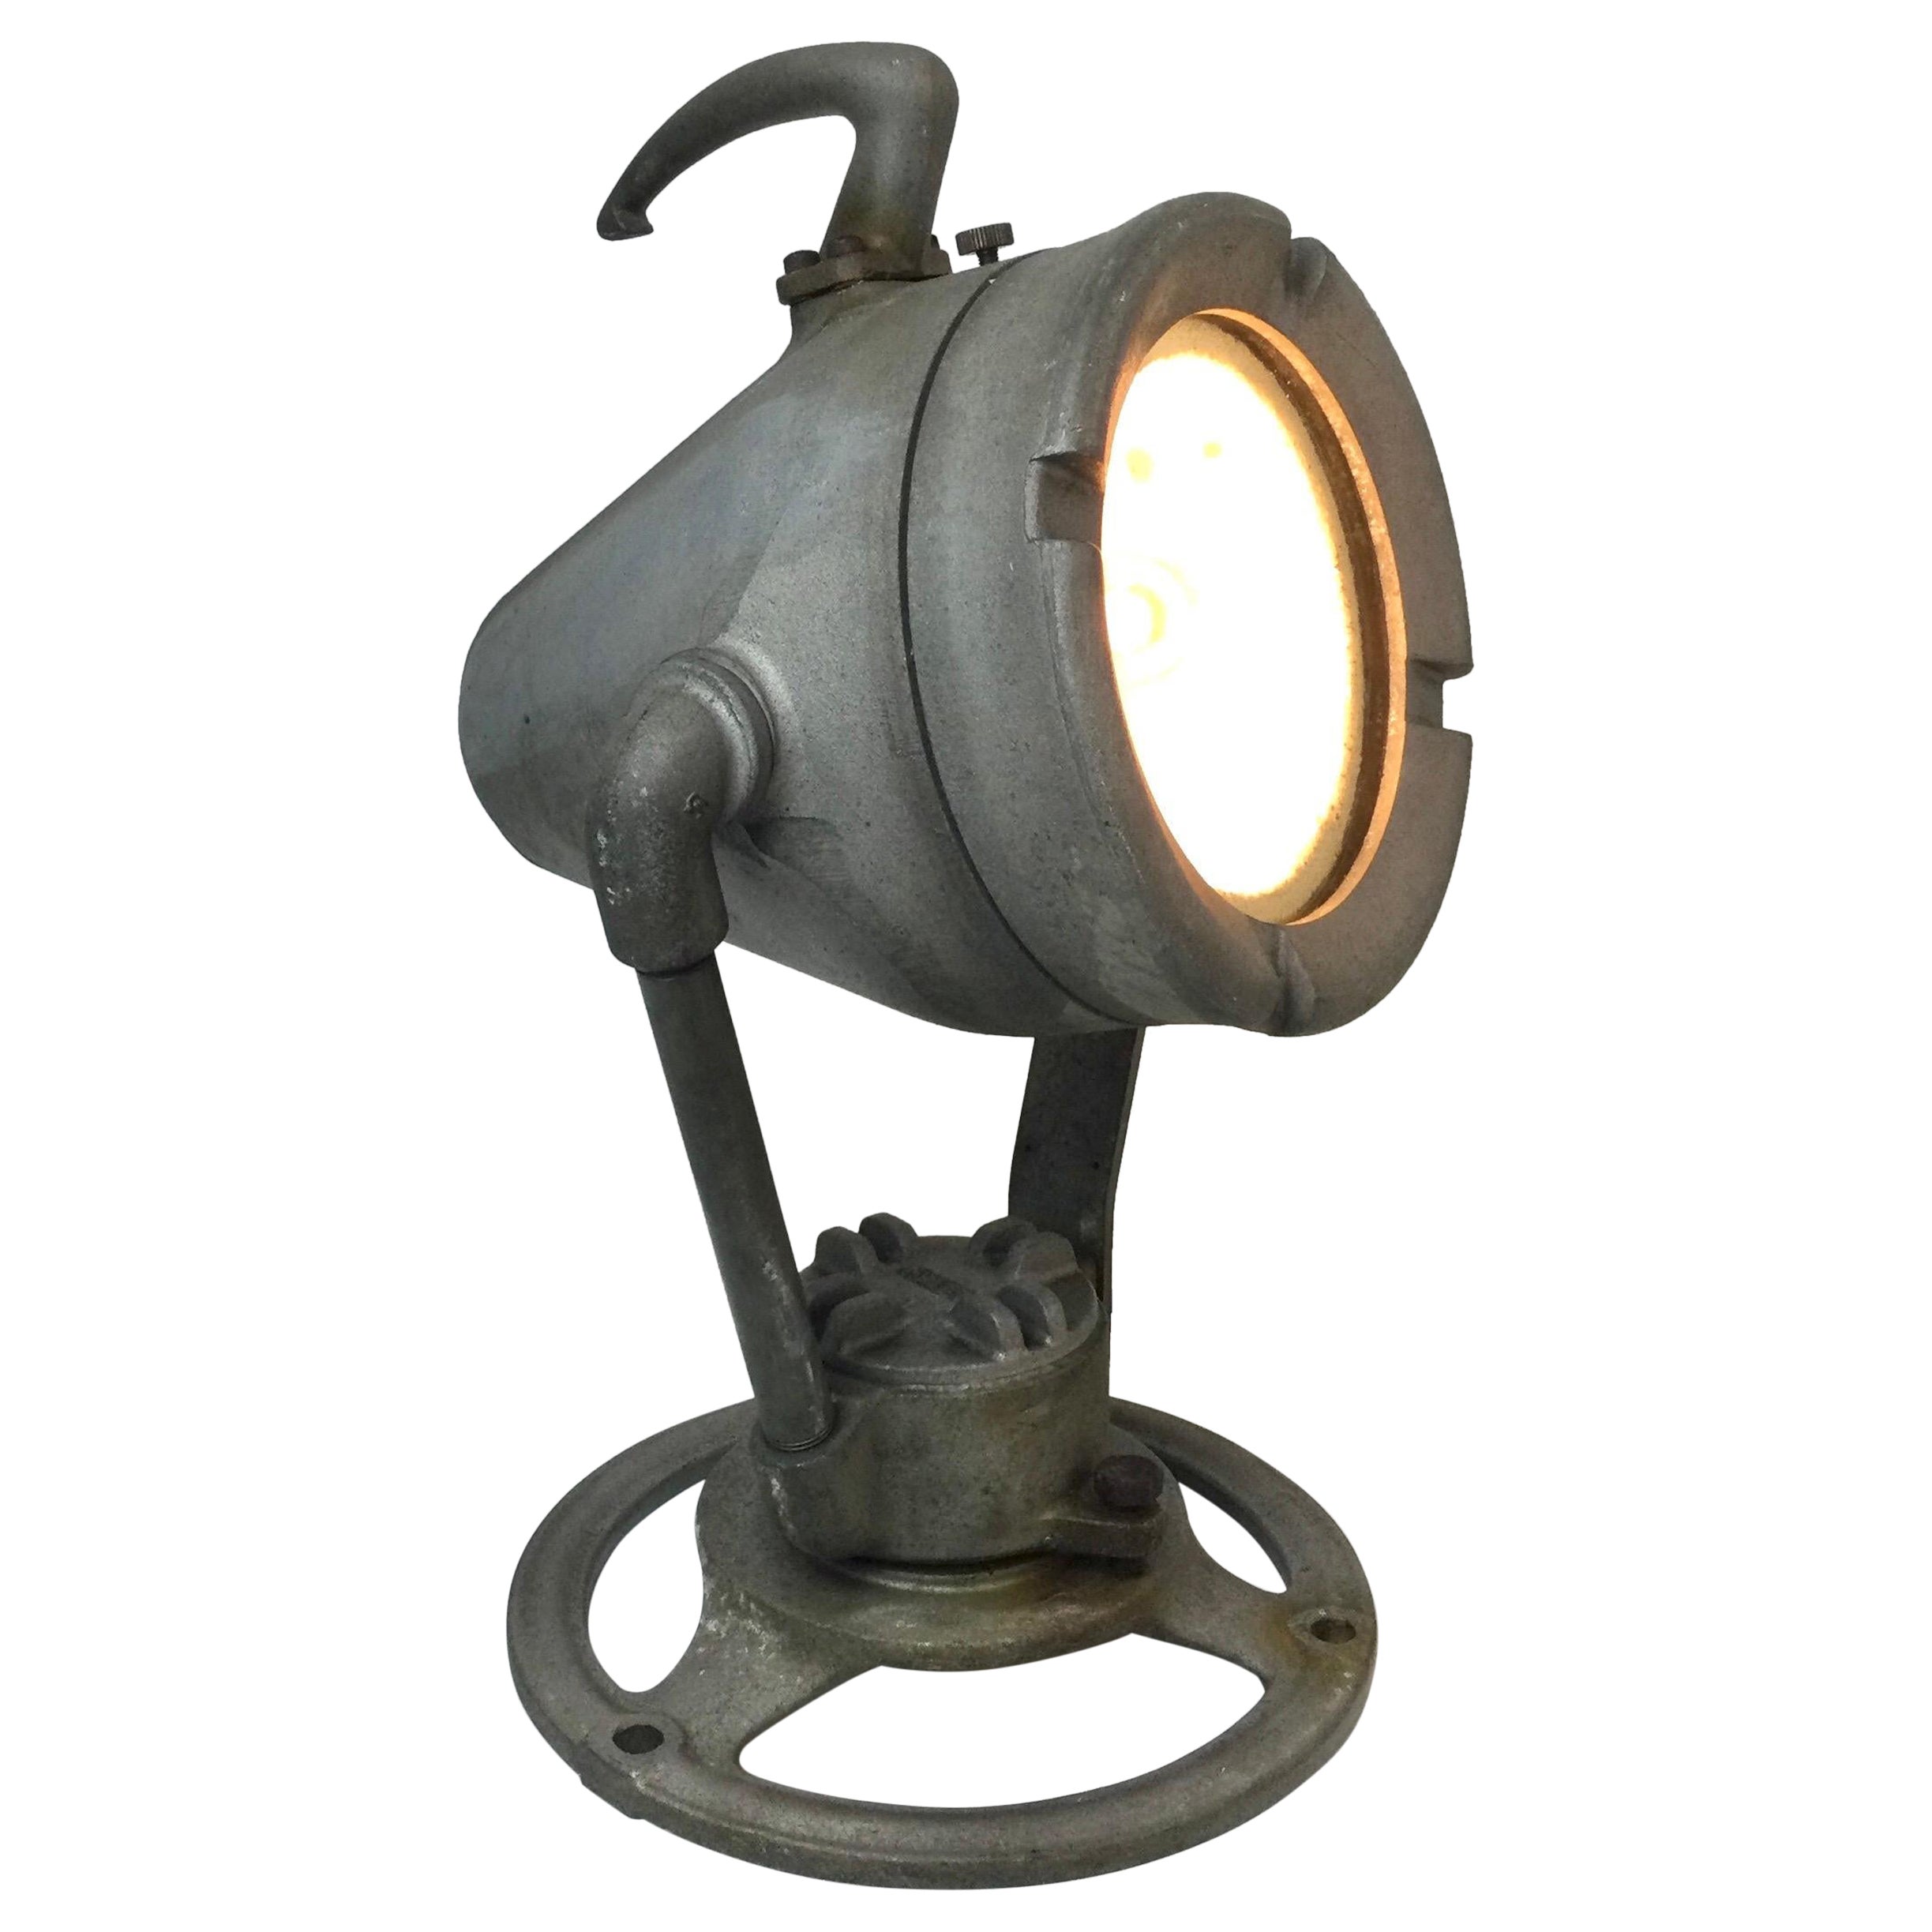 Large Antique Salvaged Pyle Nautical or Marine Spotlight For Sale